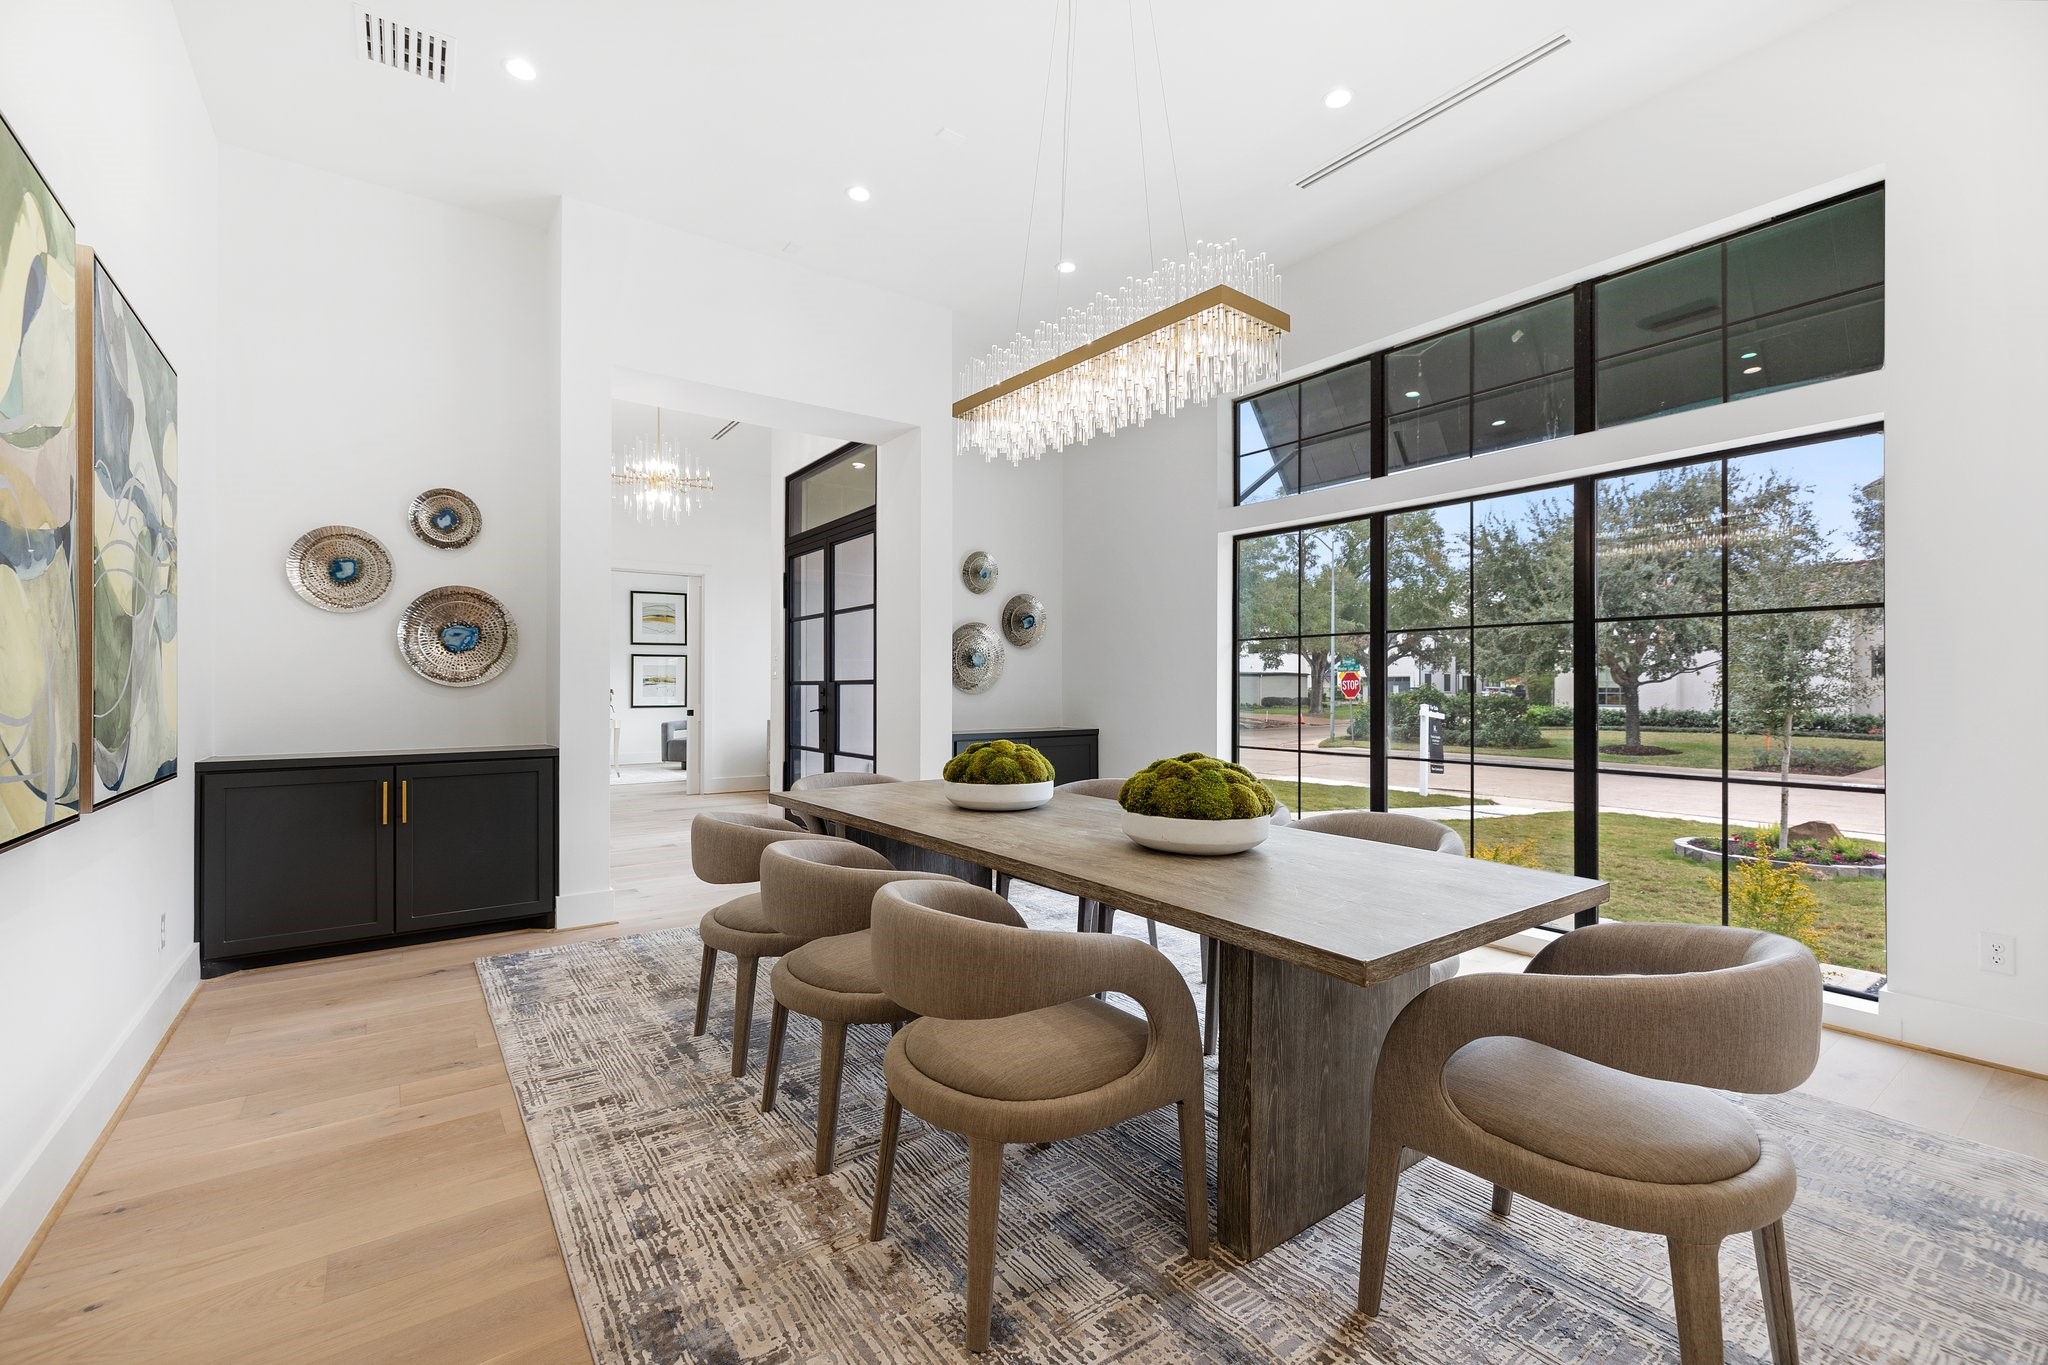 A space designed for creating cherished memories. With a view that welcomes you from the moment you enter, this dining room invites you to gather, share meals, and make lasting memories. It's not just a room; it's a canvas for the stories and moments that transform a house into a home.